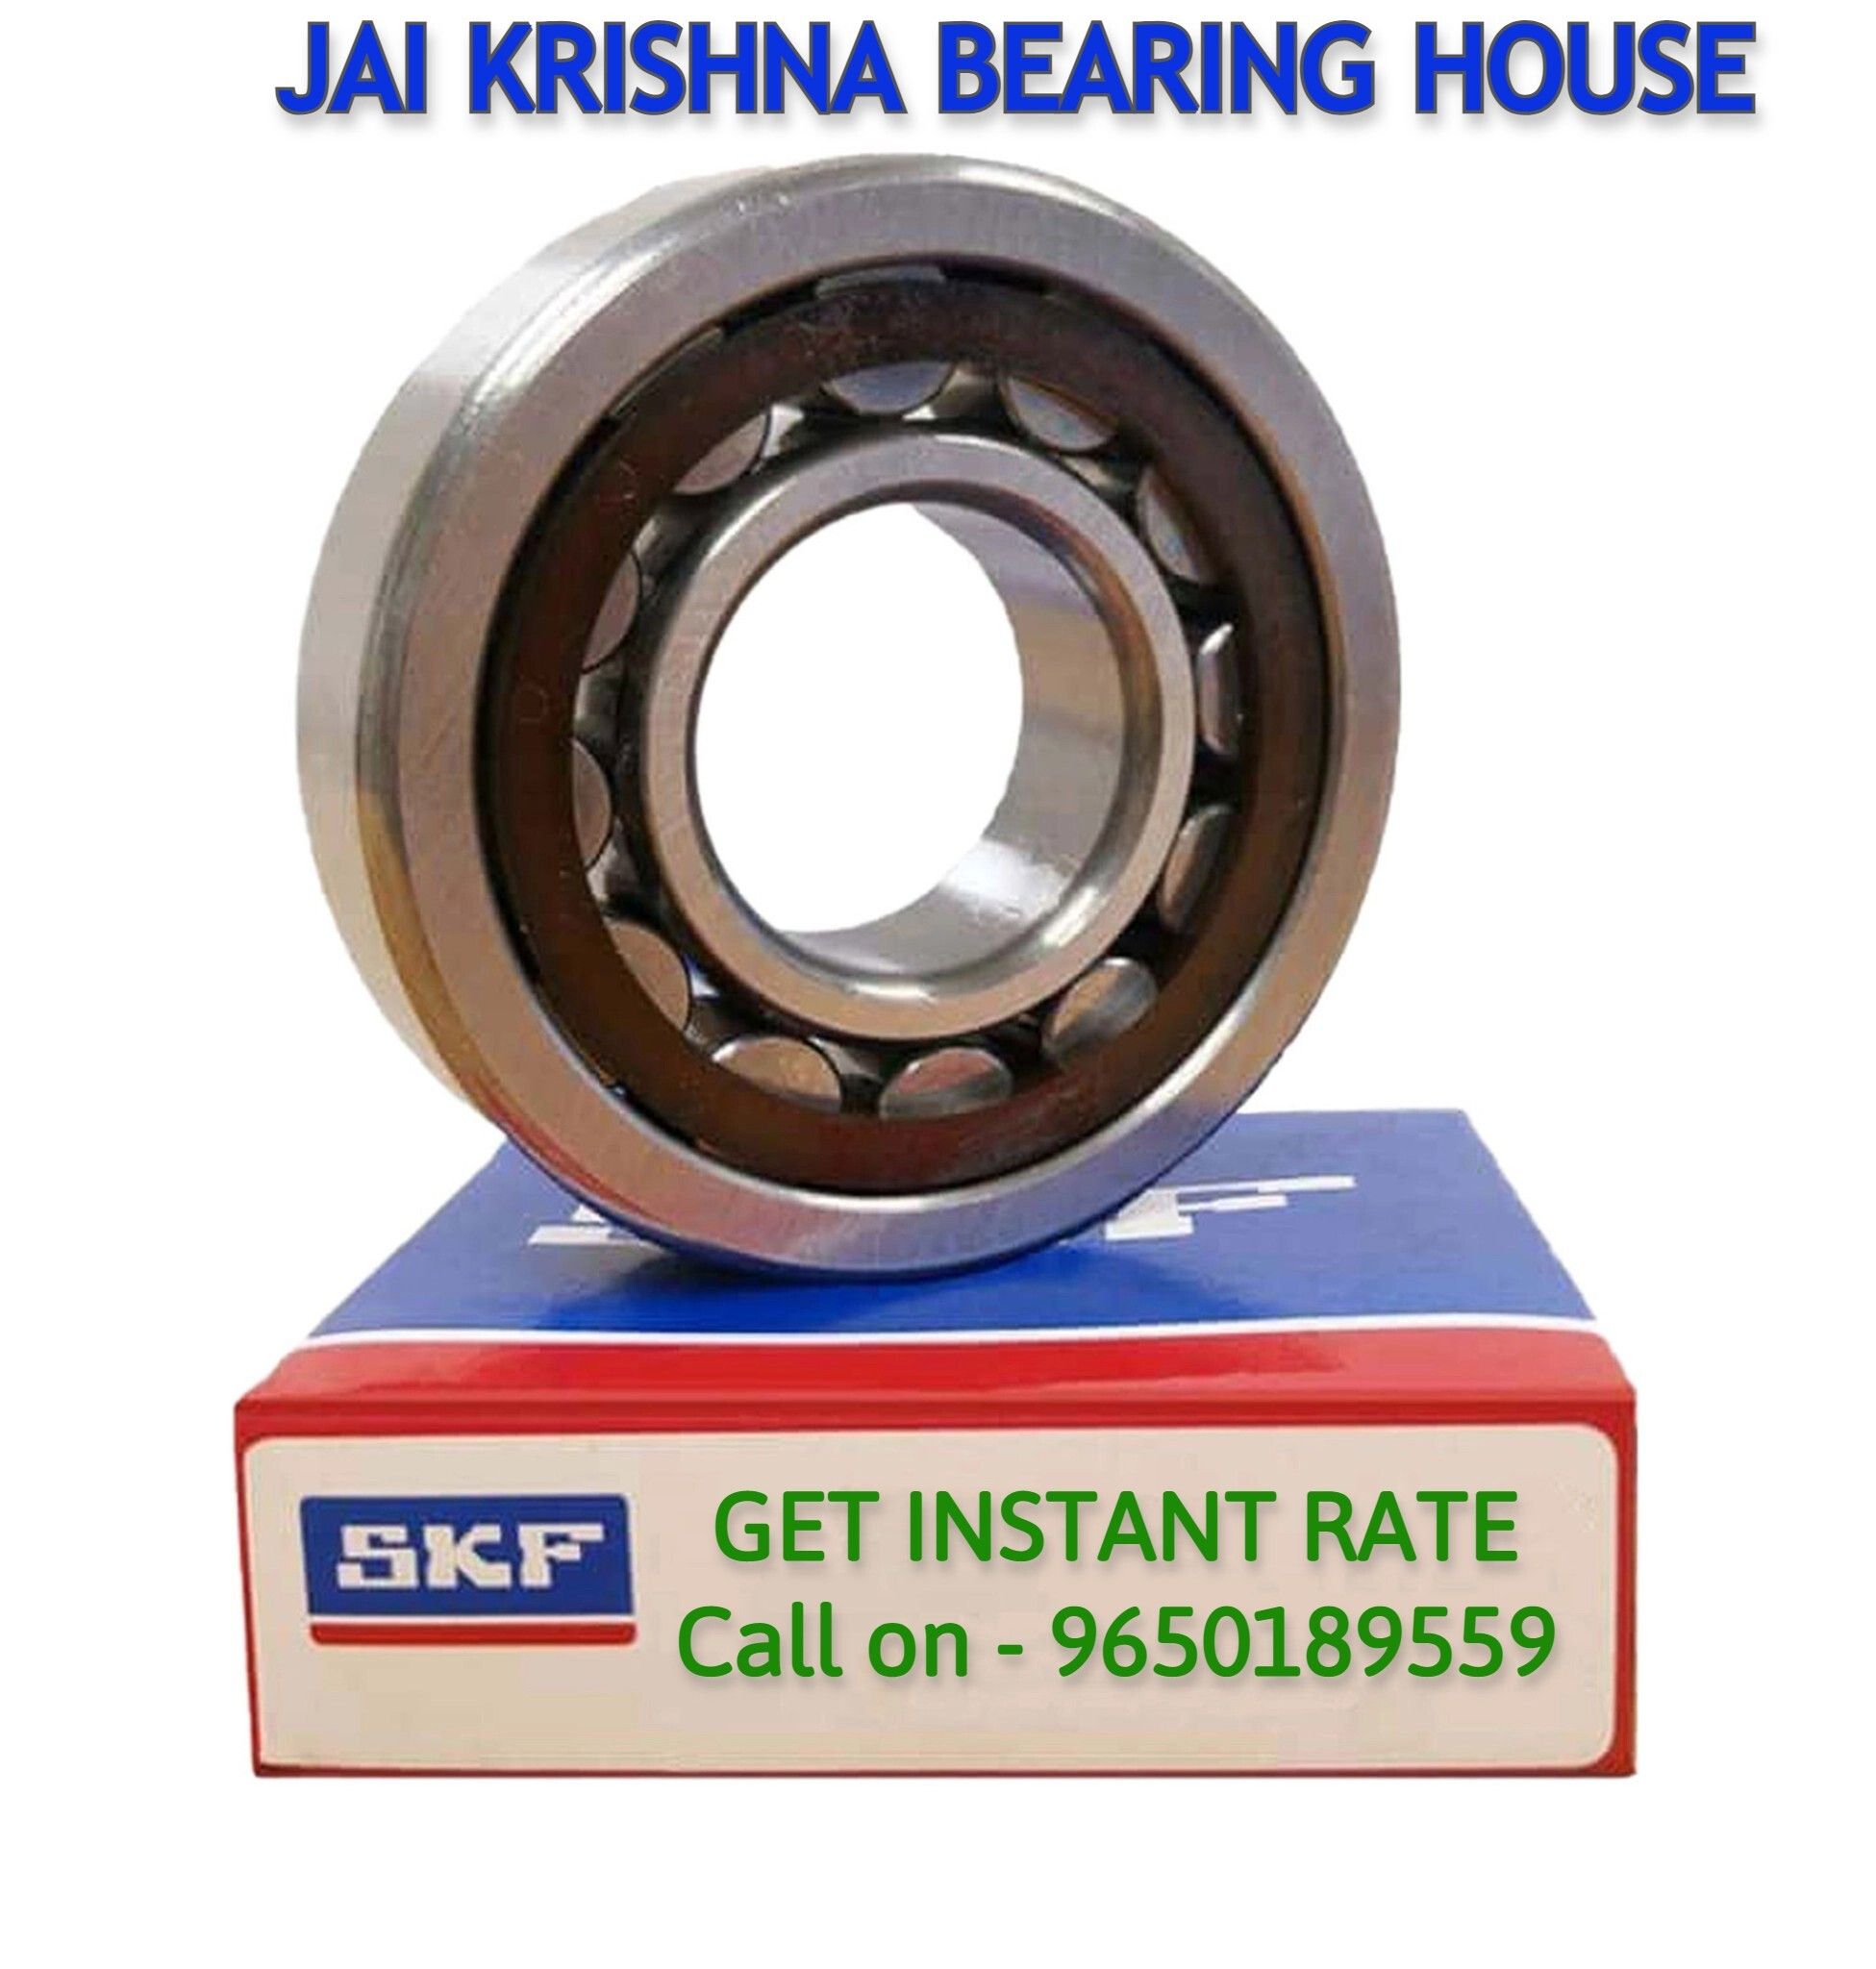 INDUSTRIAL BEARING SUPPLIERS OF SKF IN NCR